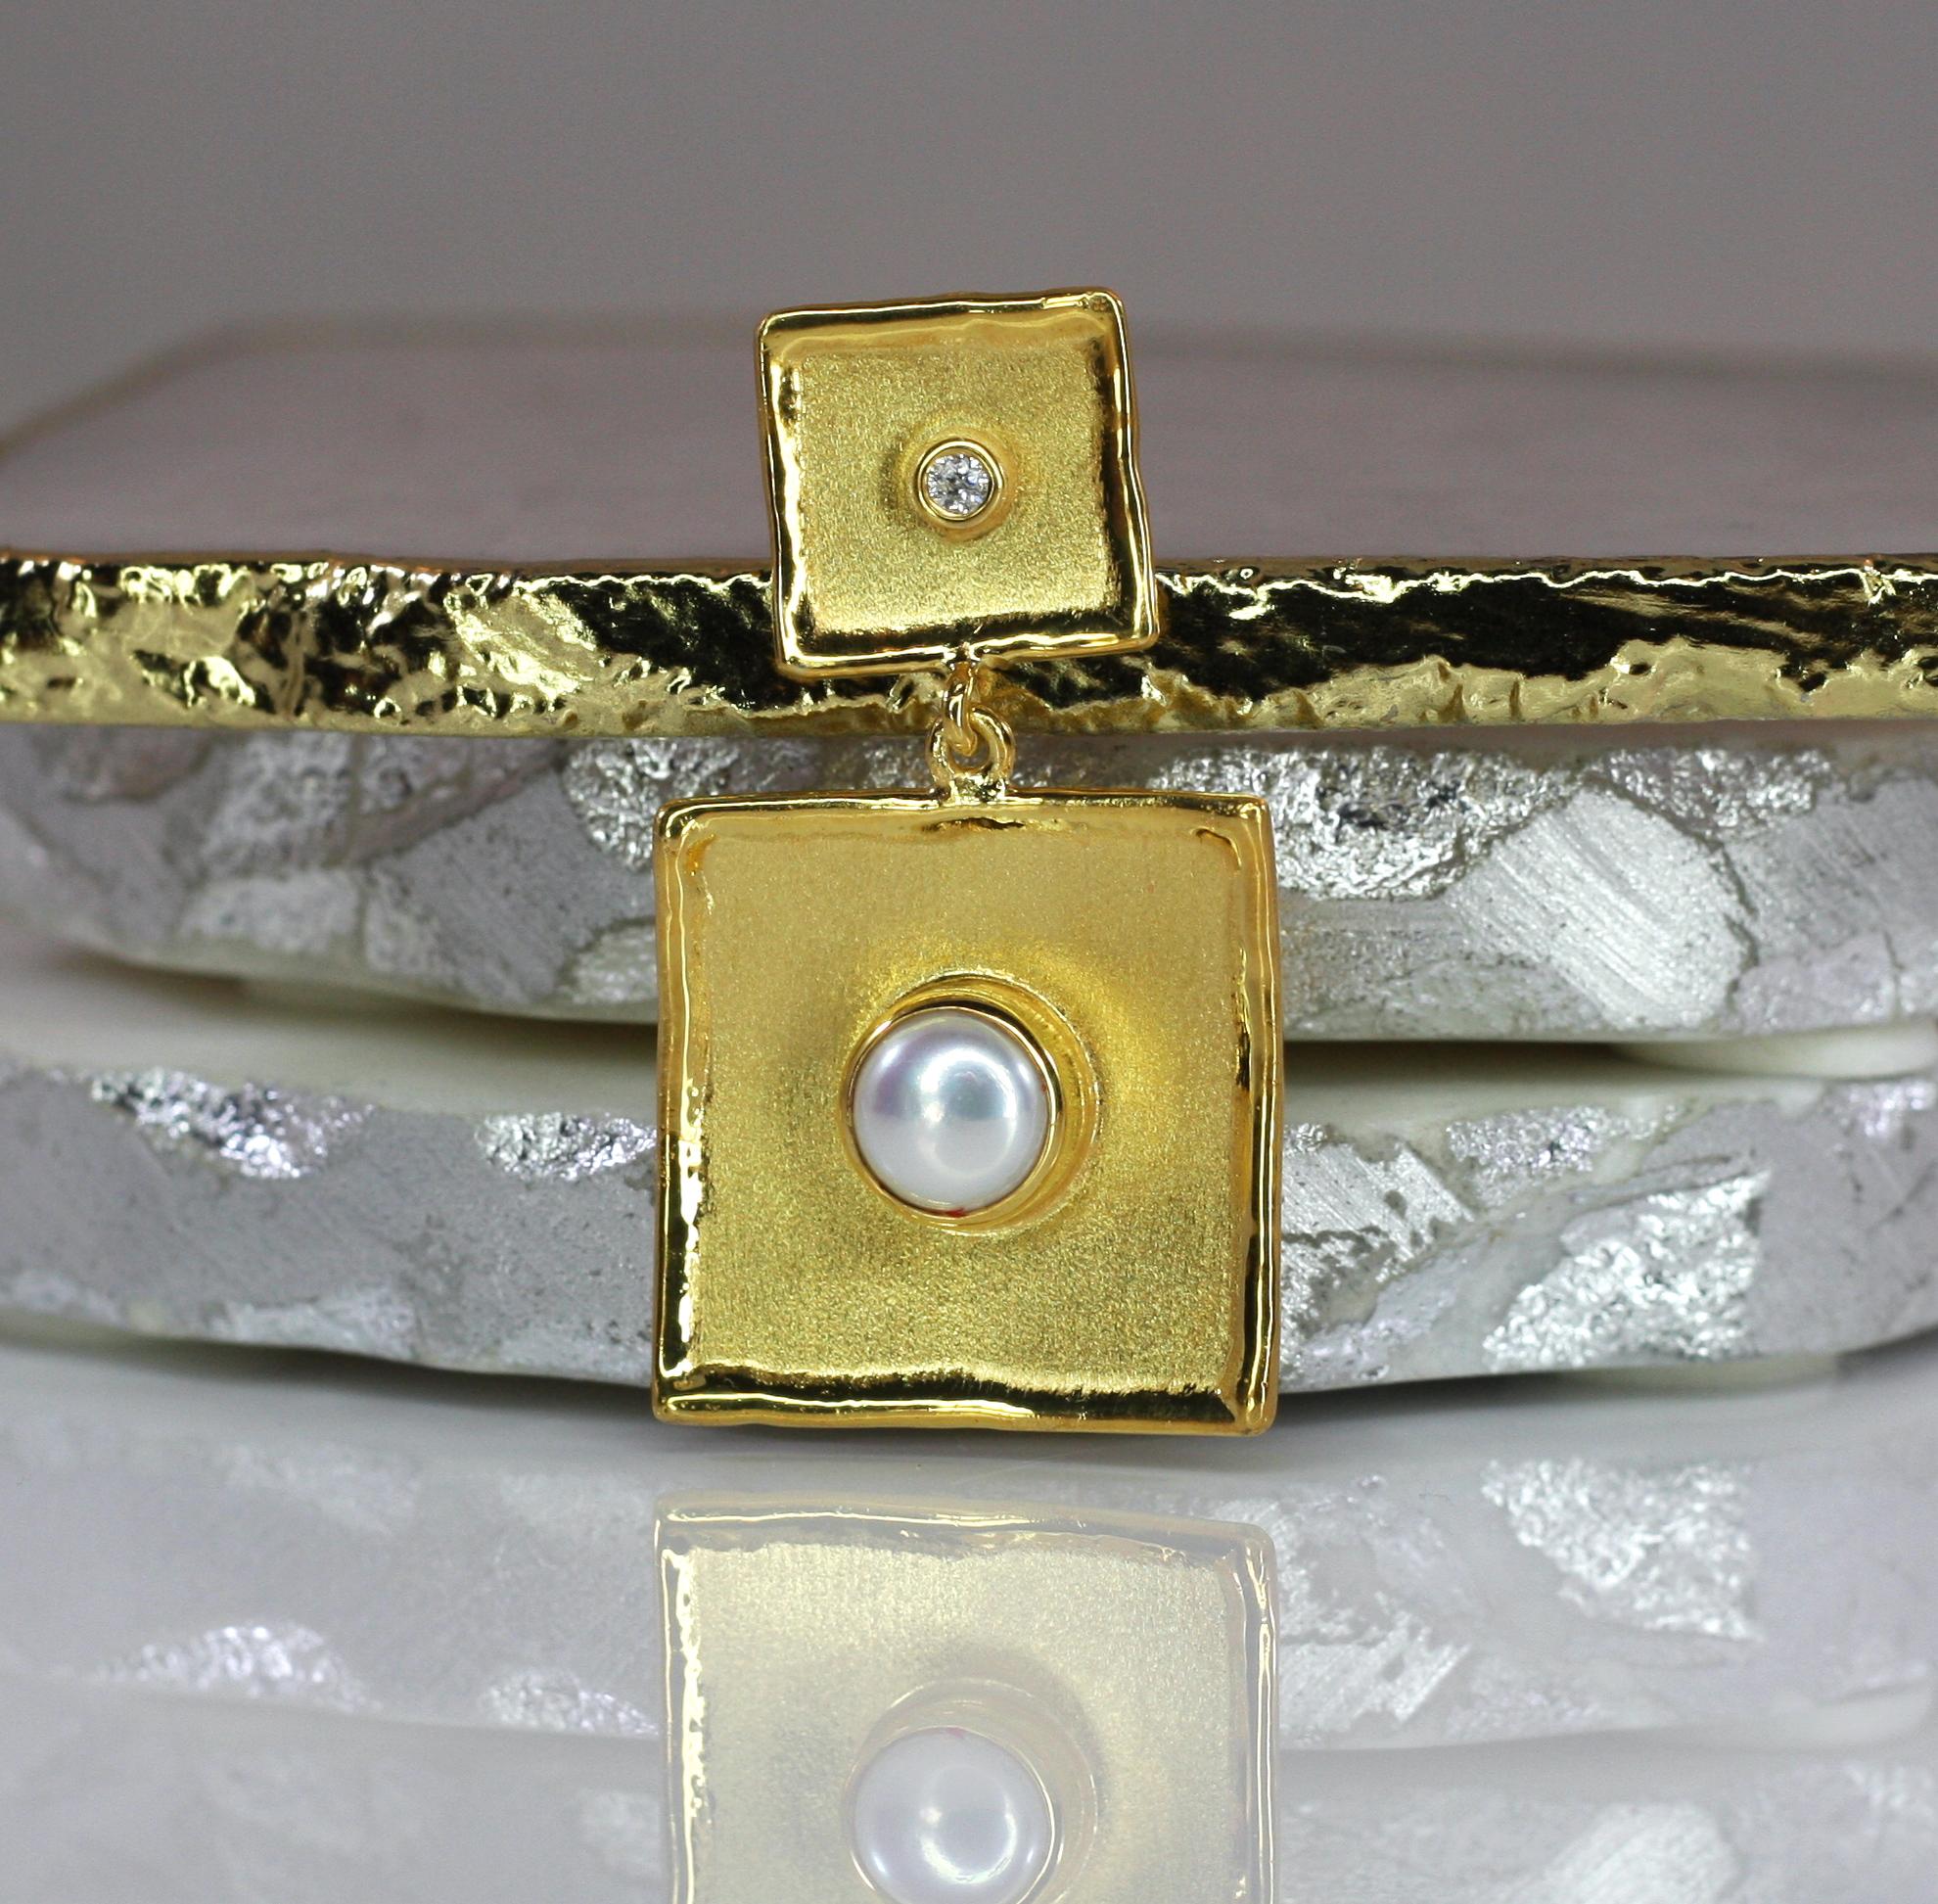 This is Yianni Creations handmade artisan slide crafted in Greece from 18 Karat Yellow Gold. This square-shaped dangle pendant features 7MM freshwater pearl and 0.03 Carat brilliant cut Diamond. The unique look is created by combining two ancient